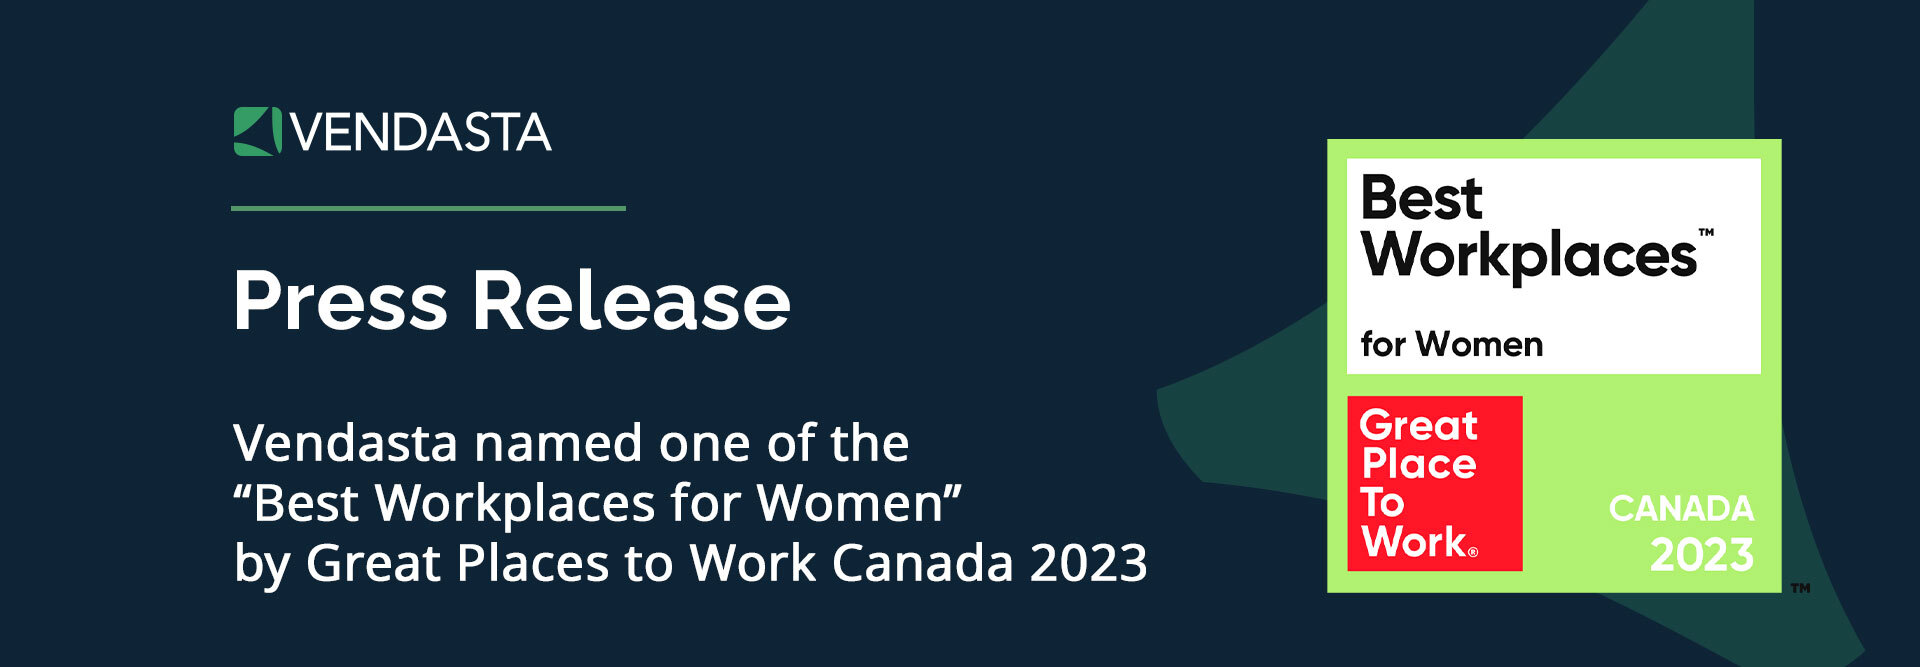 Vendasta named one of Canada’s “Best Workplaces for Women”